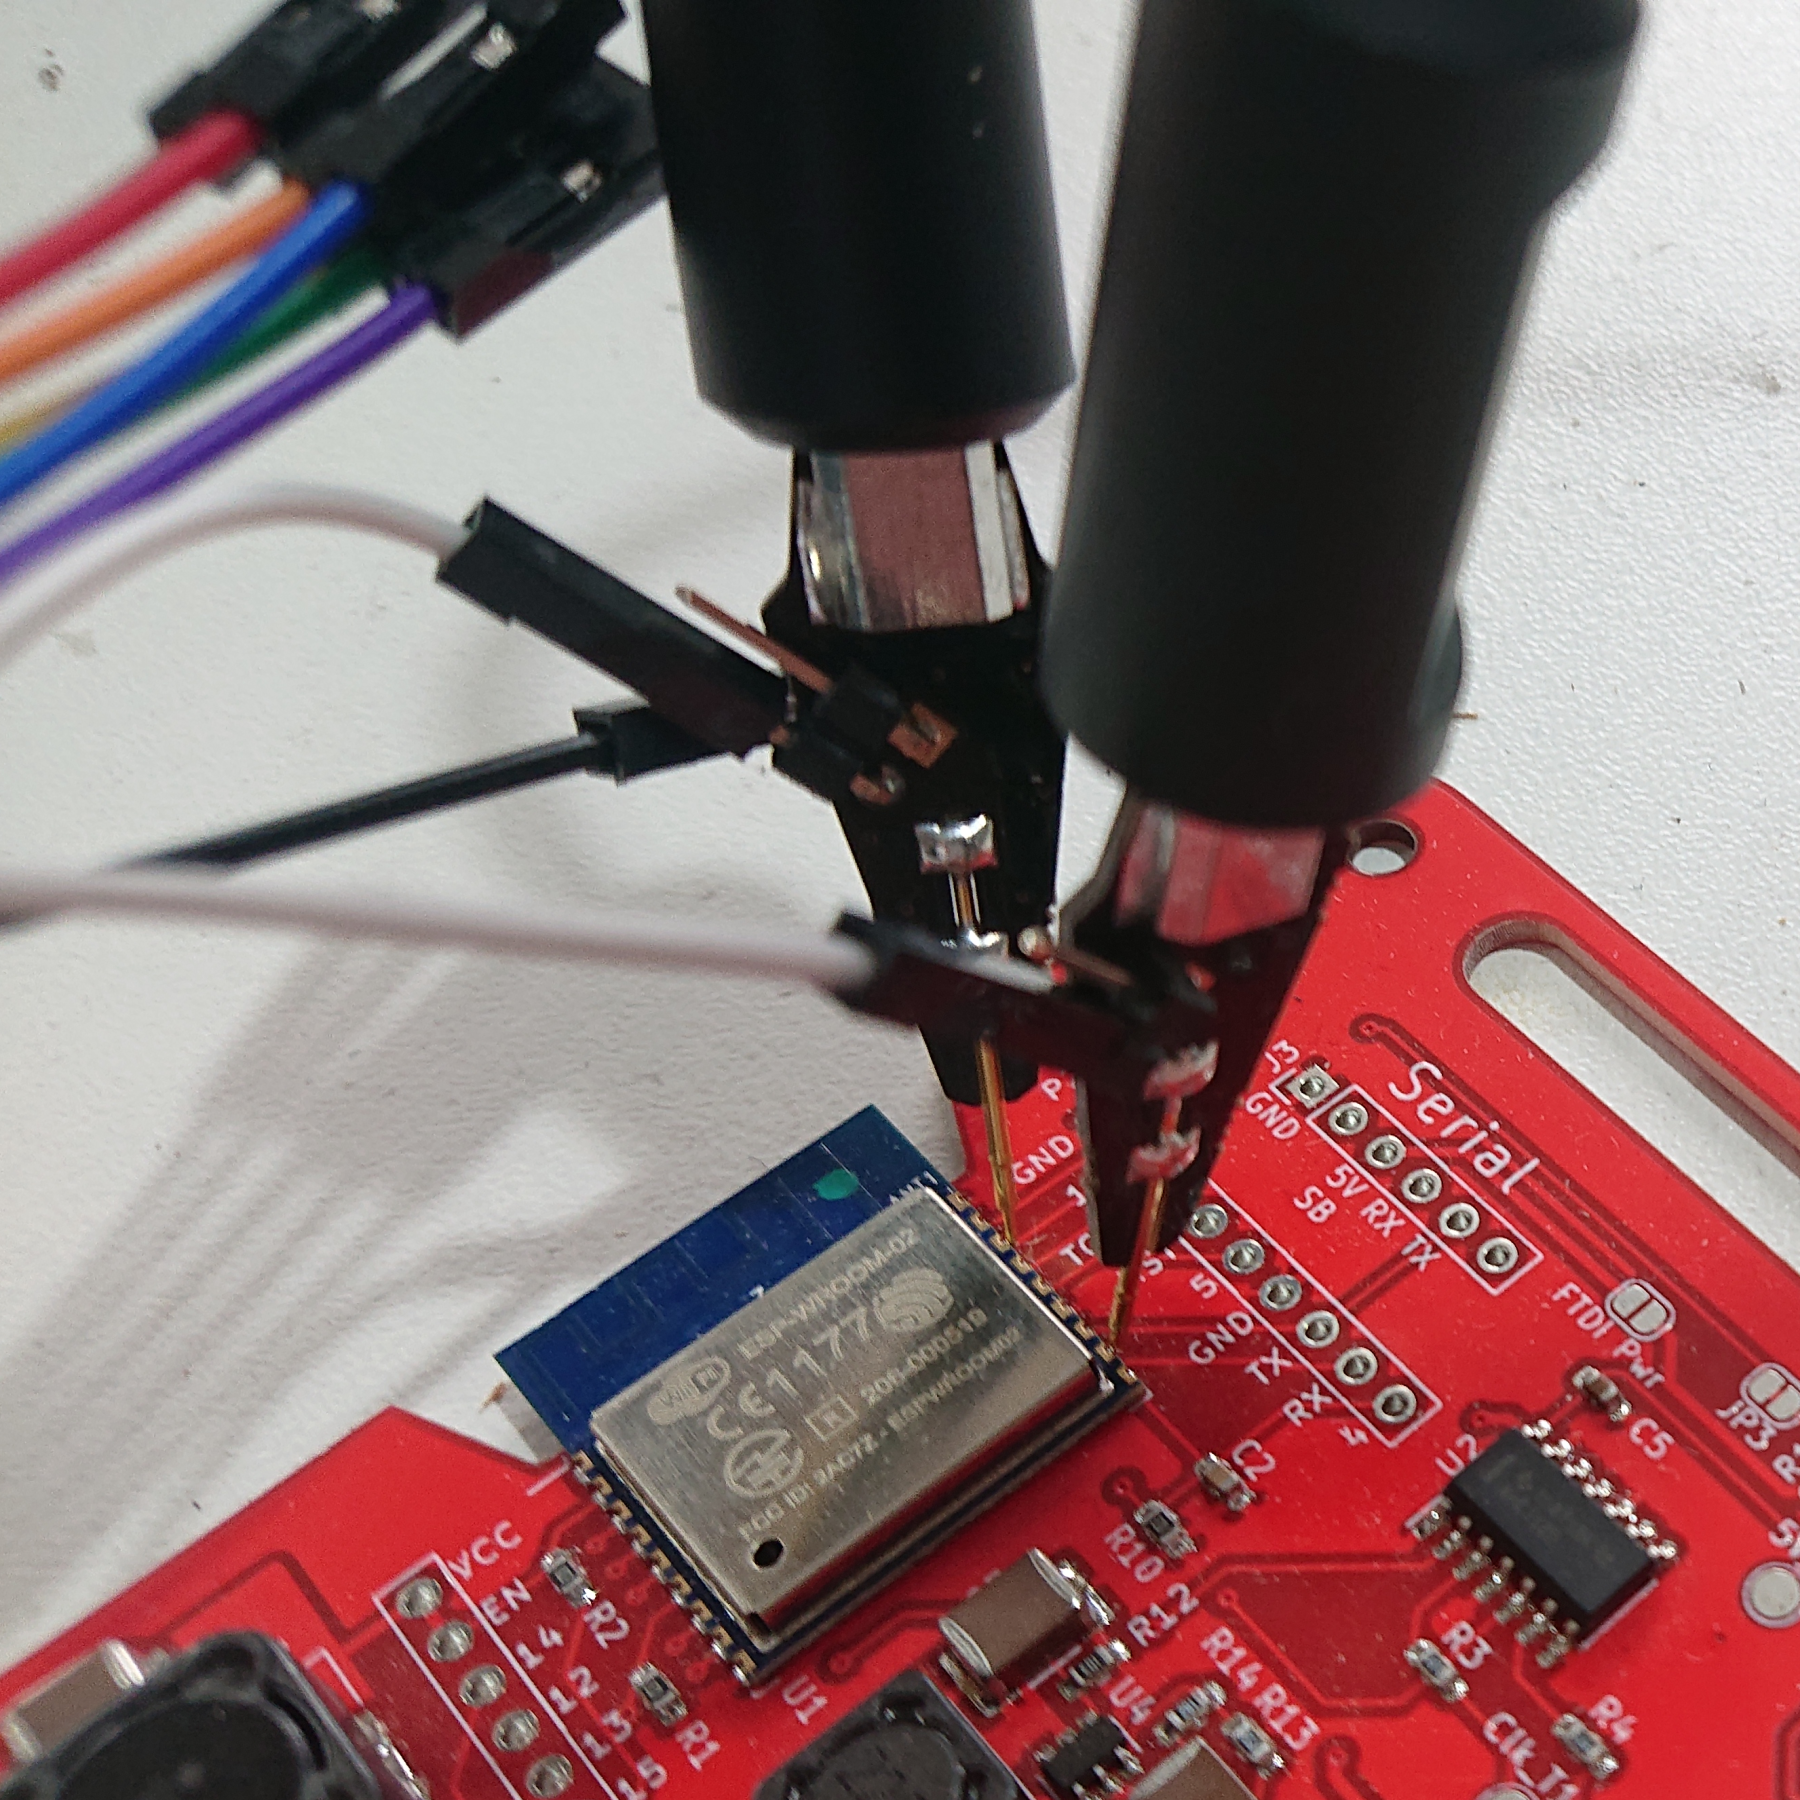 Zoomed in version of the previous photo showing a closer view of the probe pins connecting to points on the ESP8266 on the board